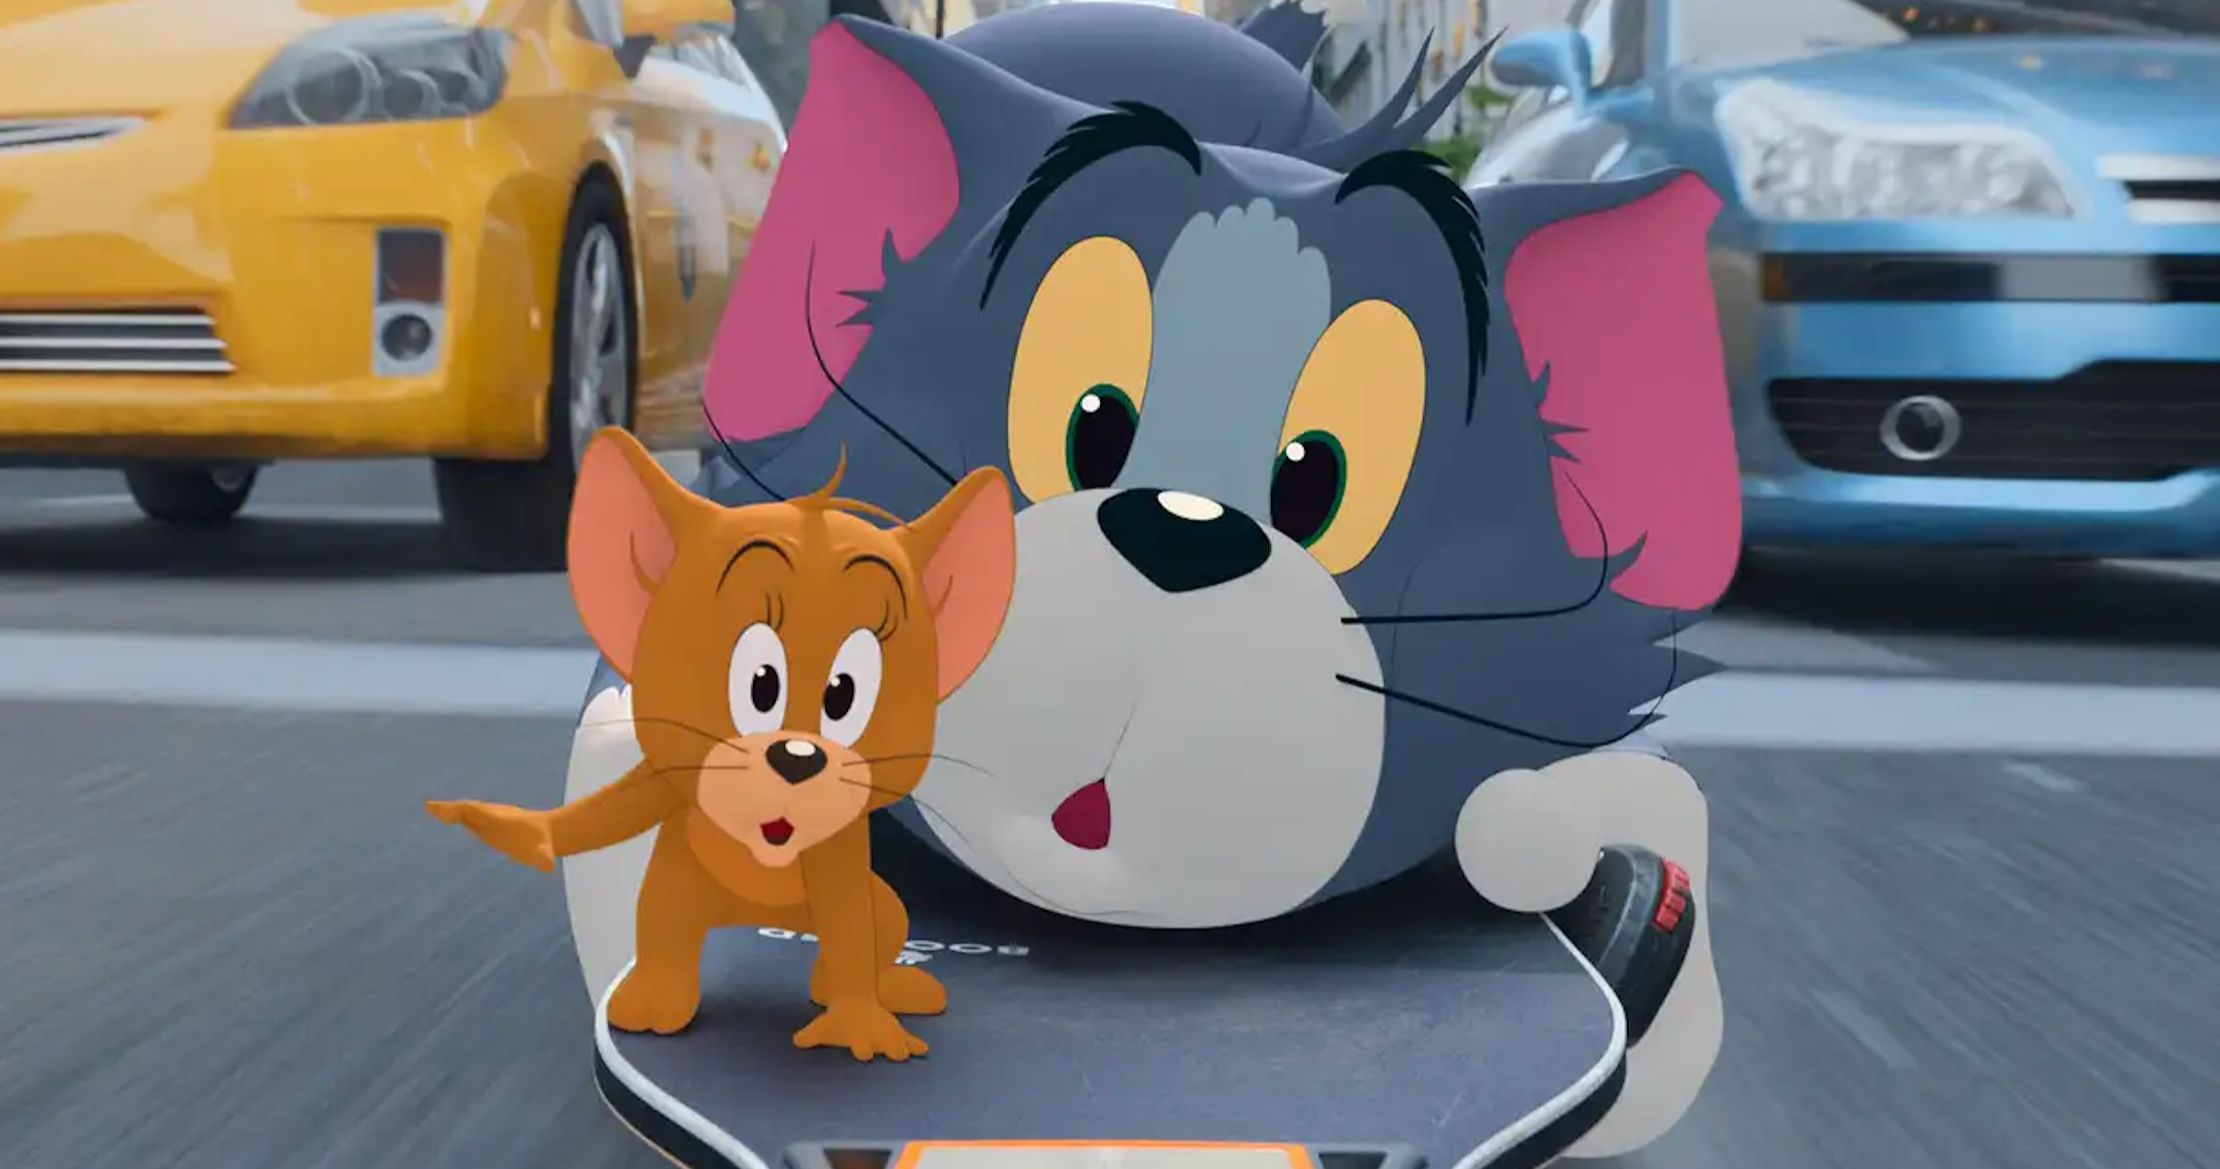 Tom & Jerry Review: A Live-Action Hipster Remake That's Strictly for Kids